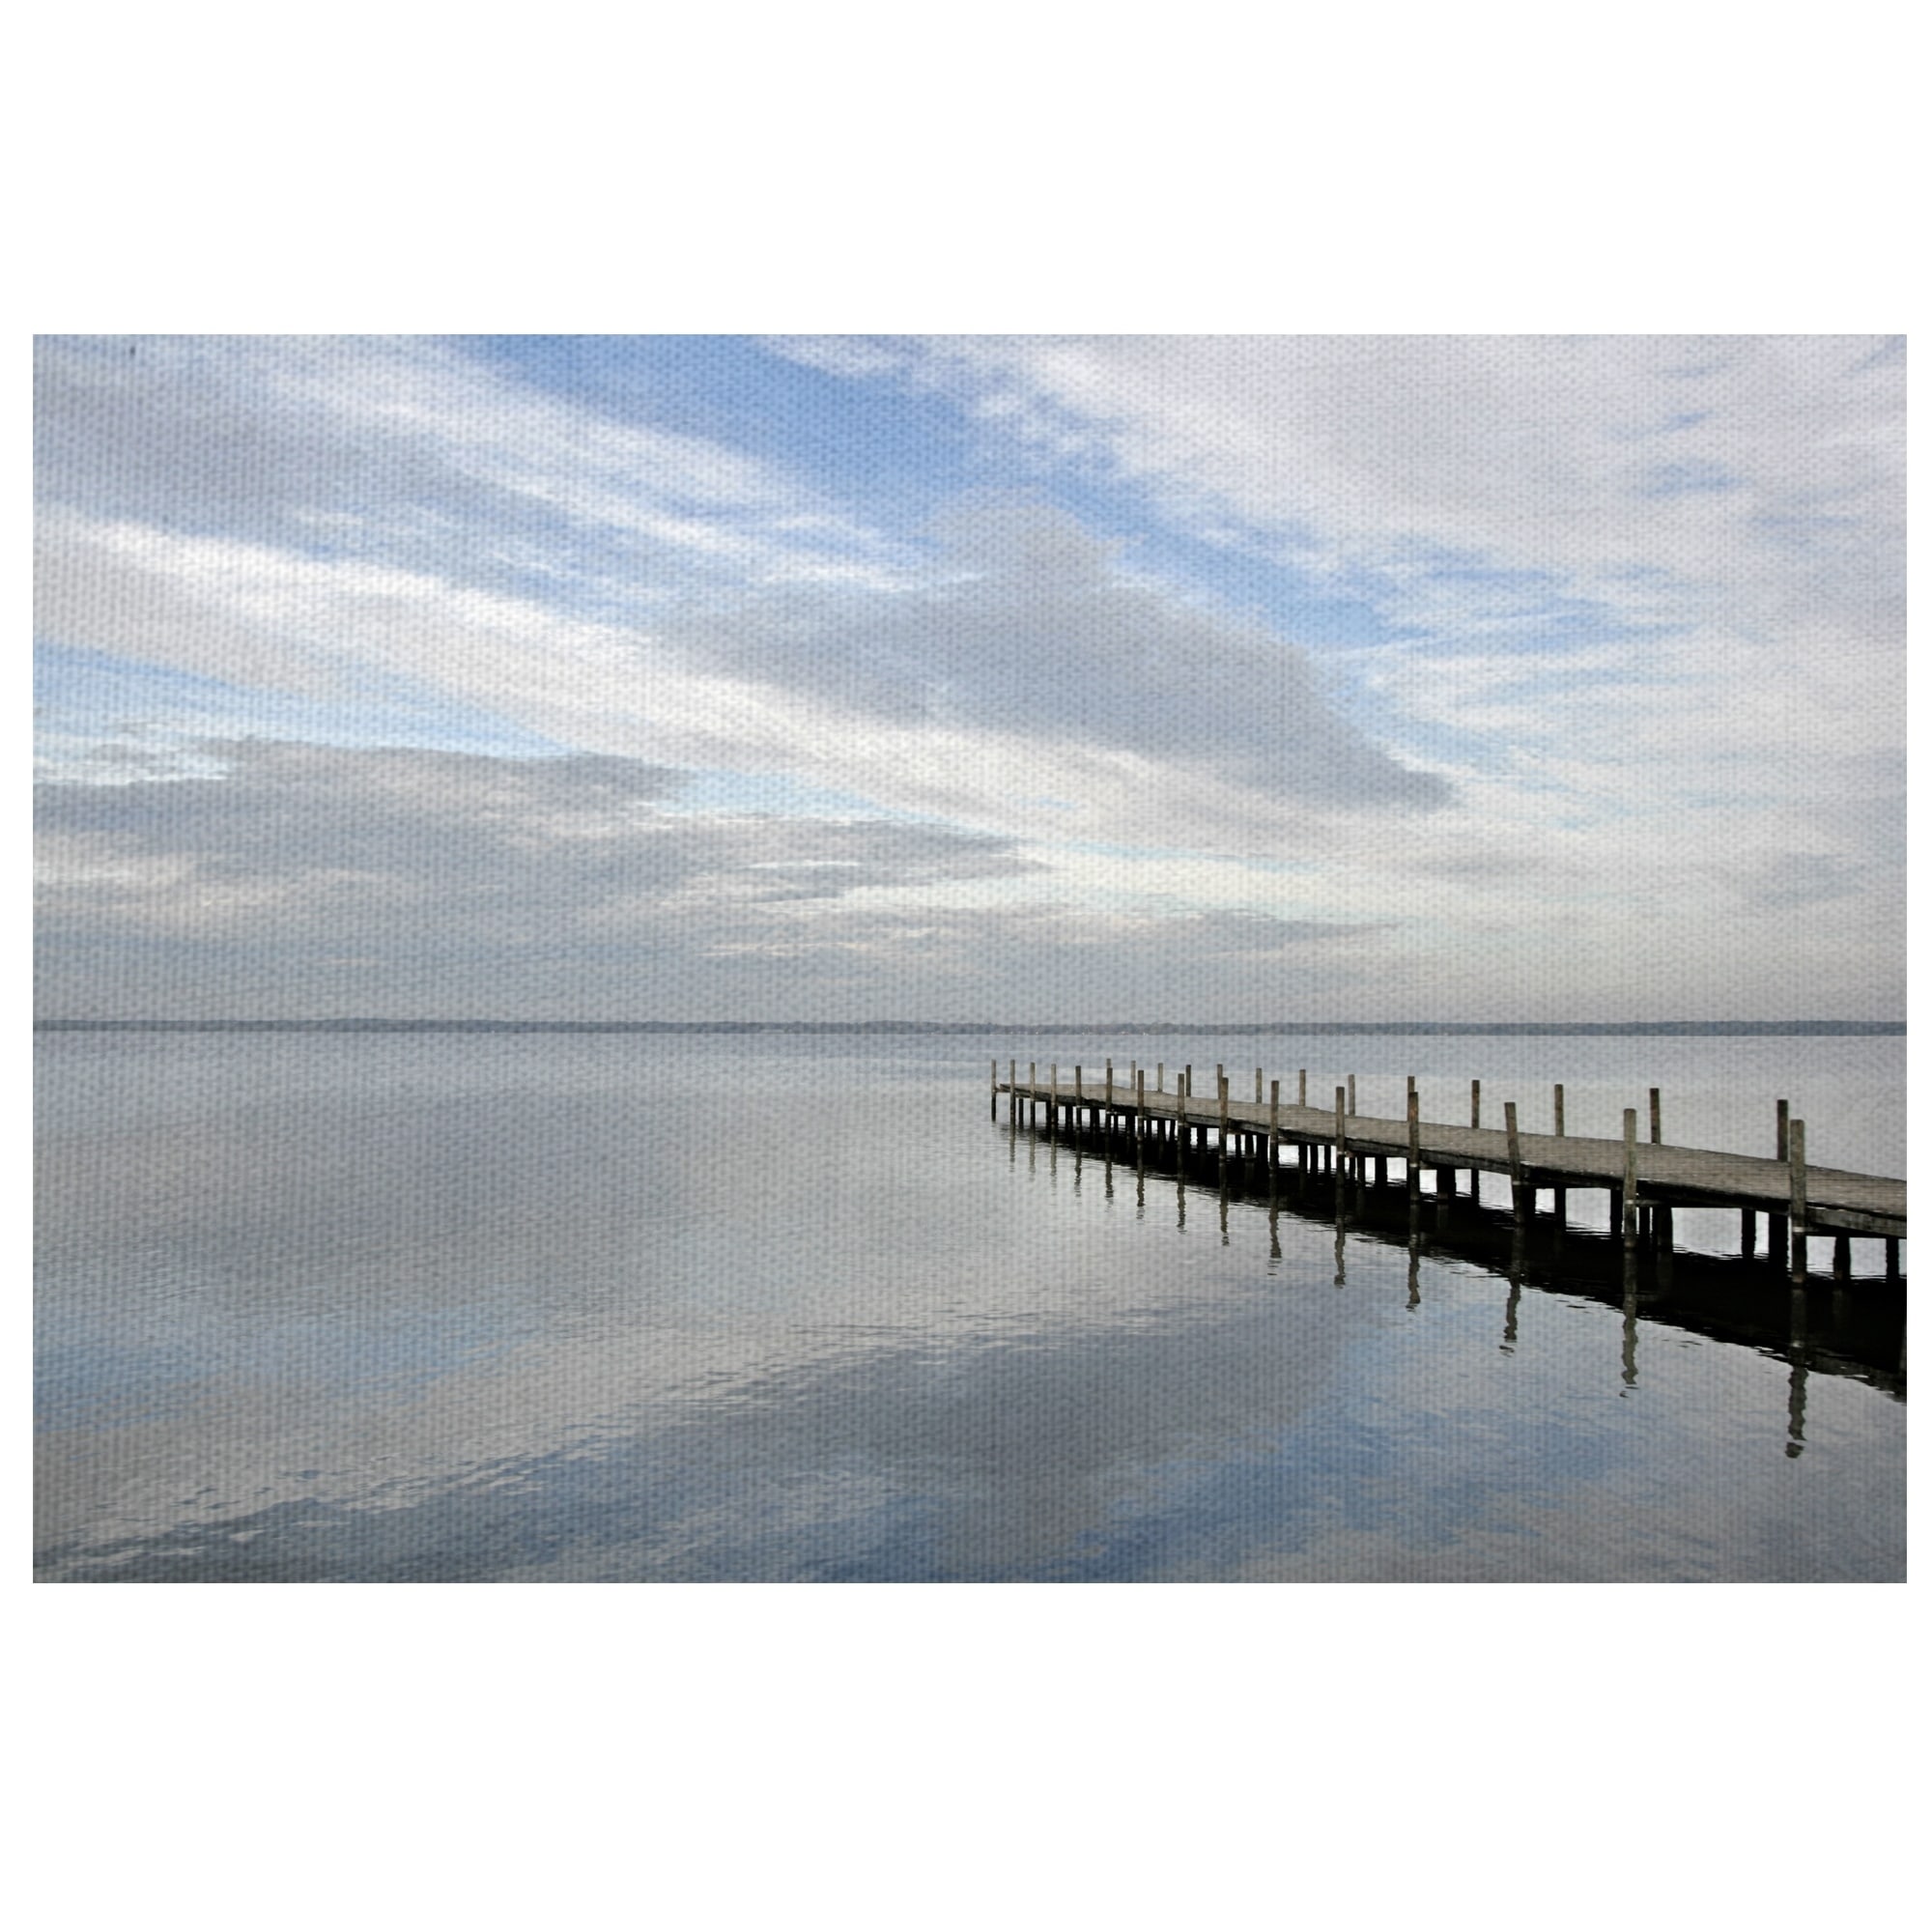 Soul Searching On the Ocean Pier by Ilona Wellmann Wrapped Canvas Photo Art  Print Bed Bath  Beyond 22736305